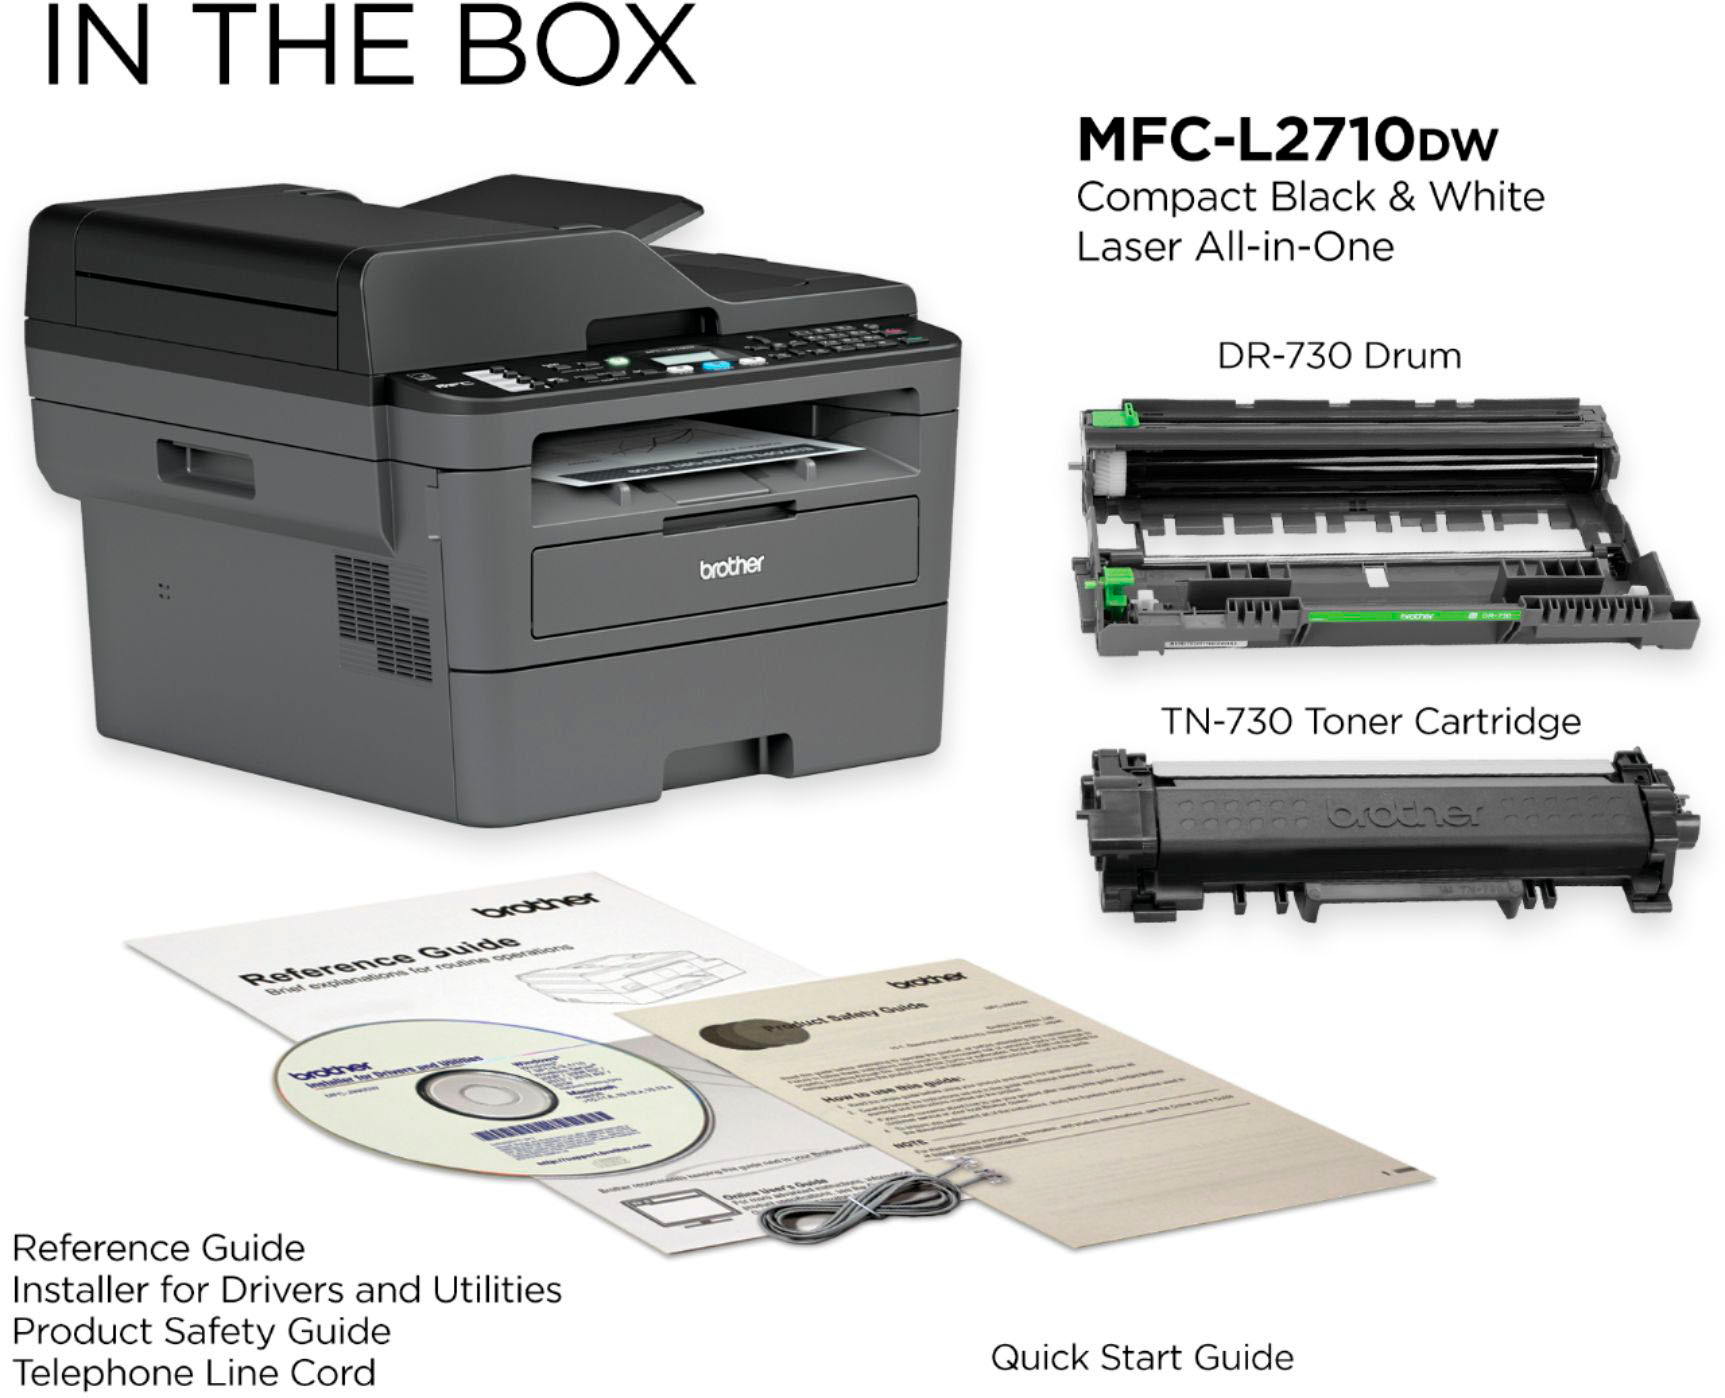 Testdriving A Brother All-In-One Laser Printer